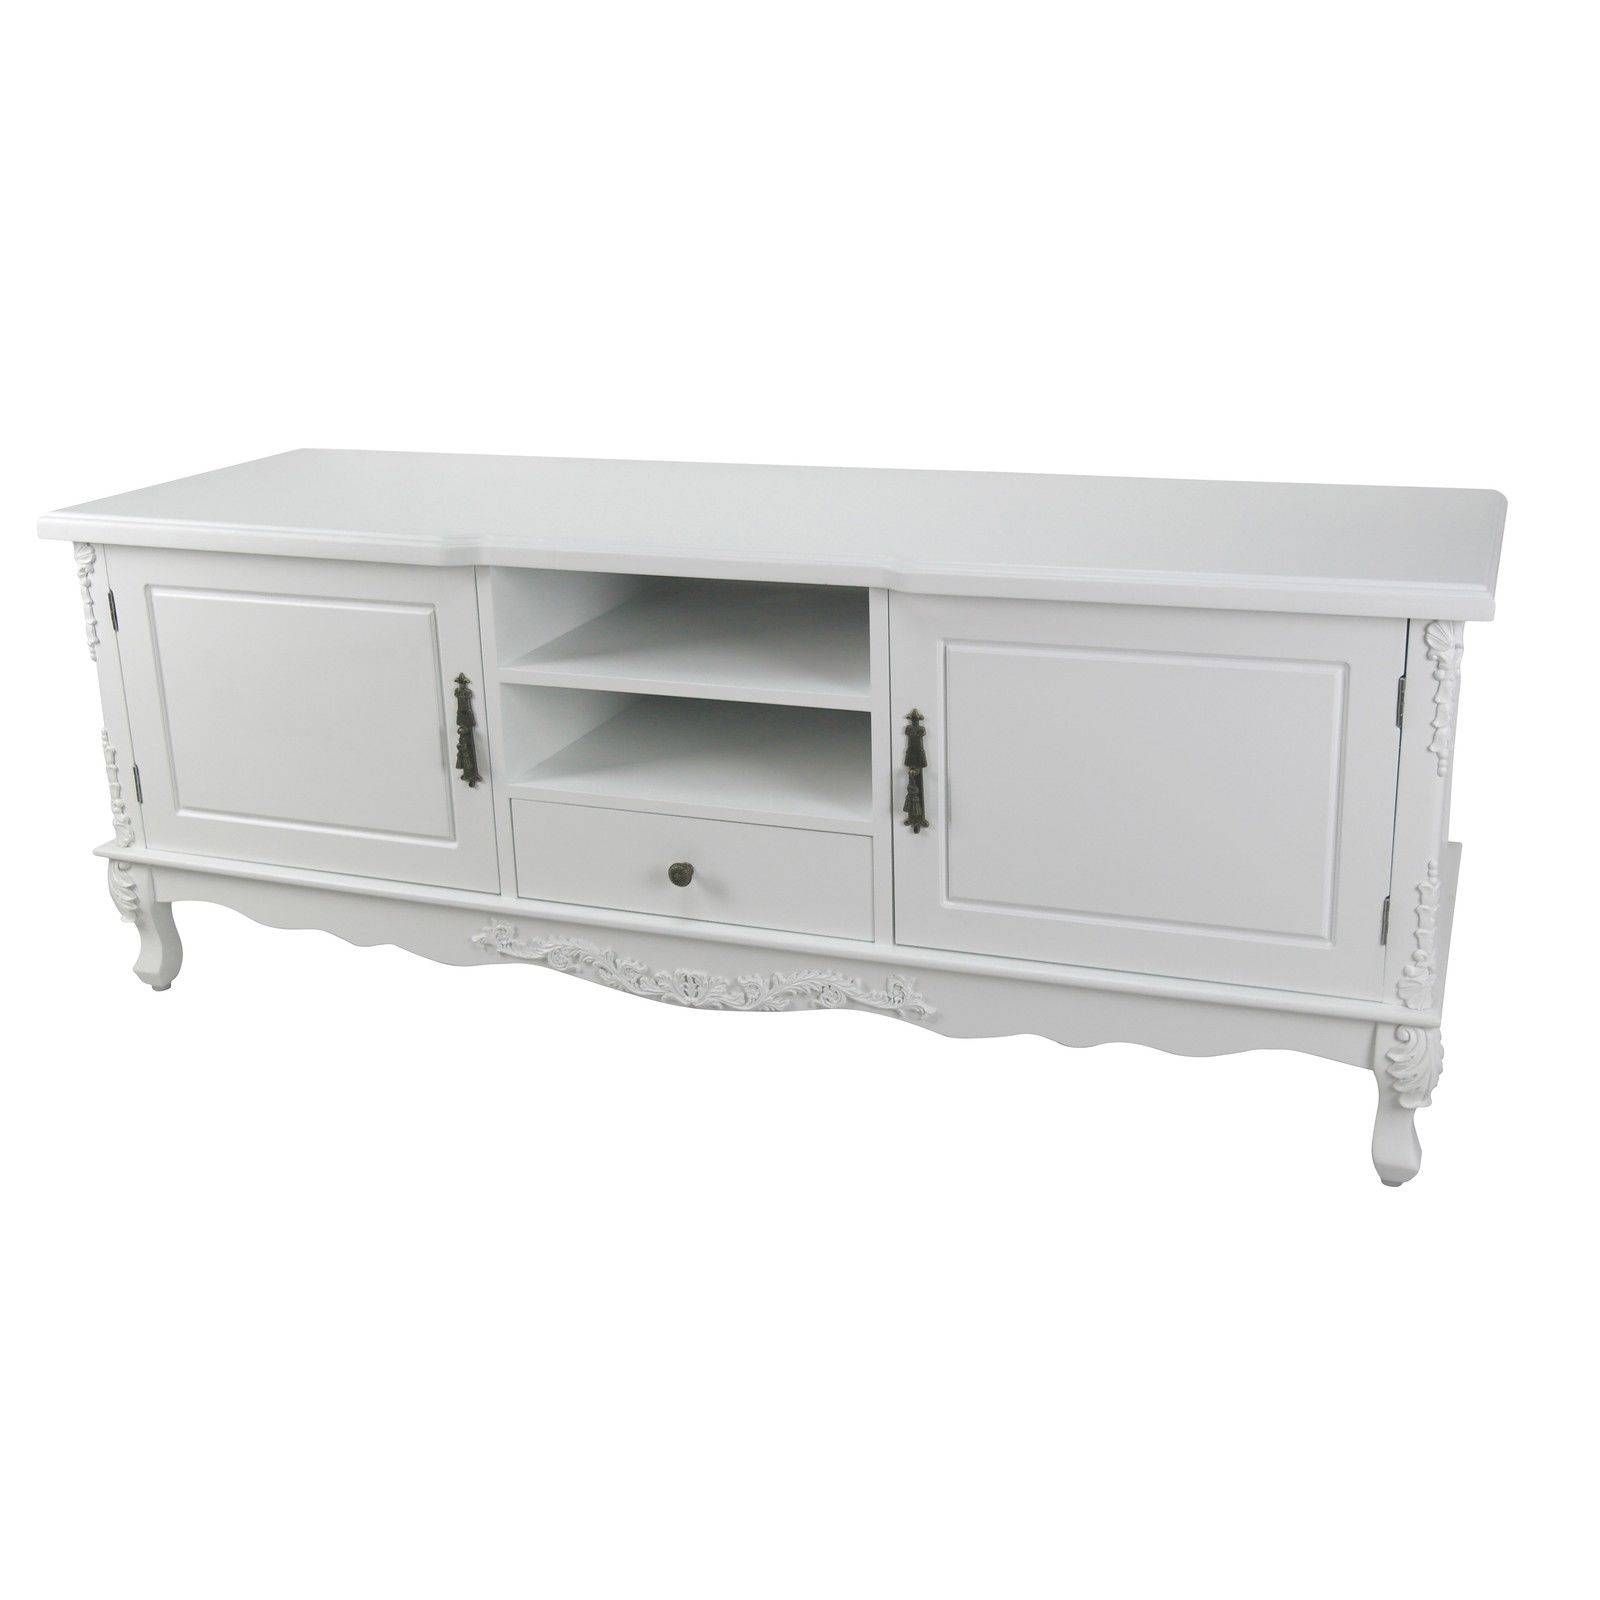 French Style White Large Cabinet Tv Unit Furniture – La Maison Inside French Style Tv Cabinets (View 8 of 15)